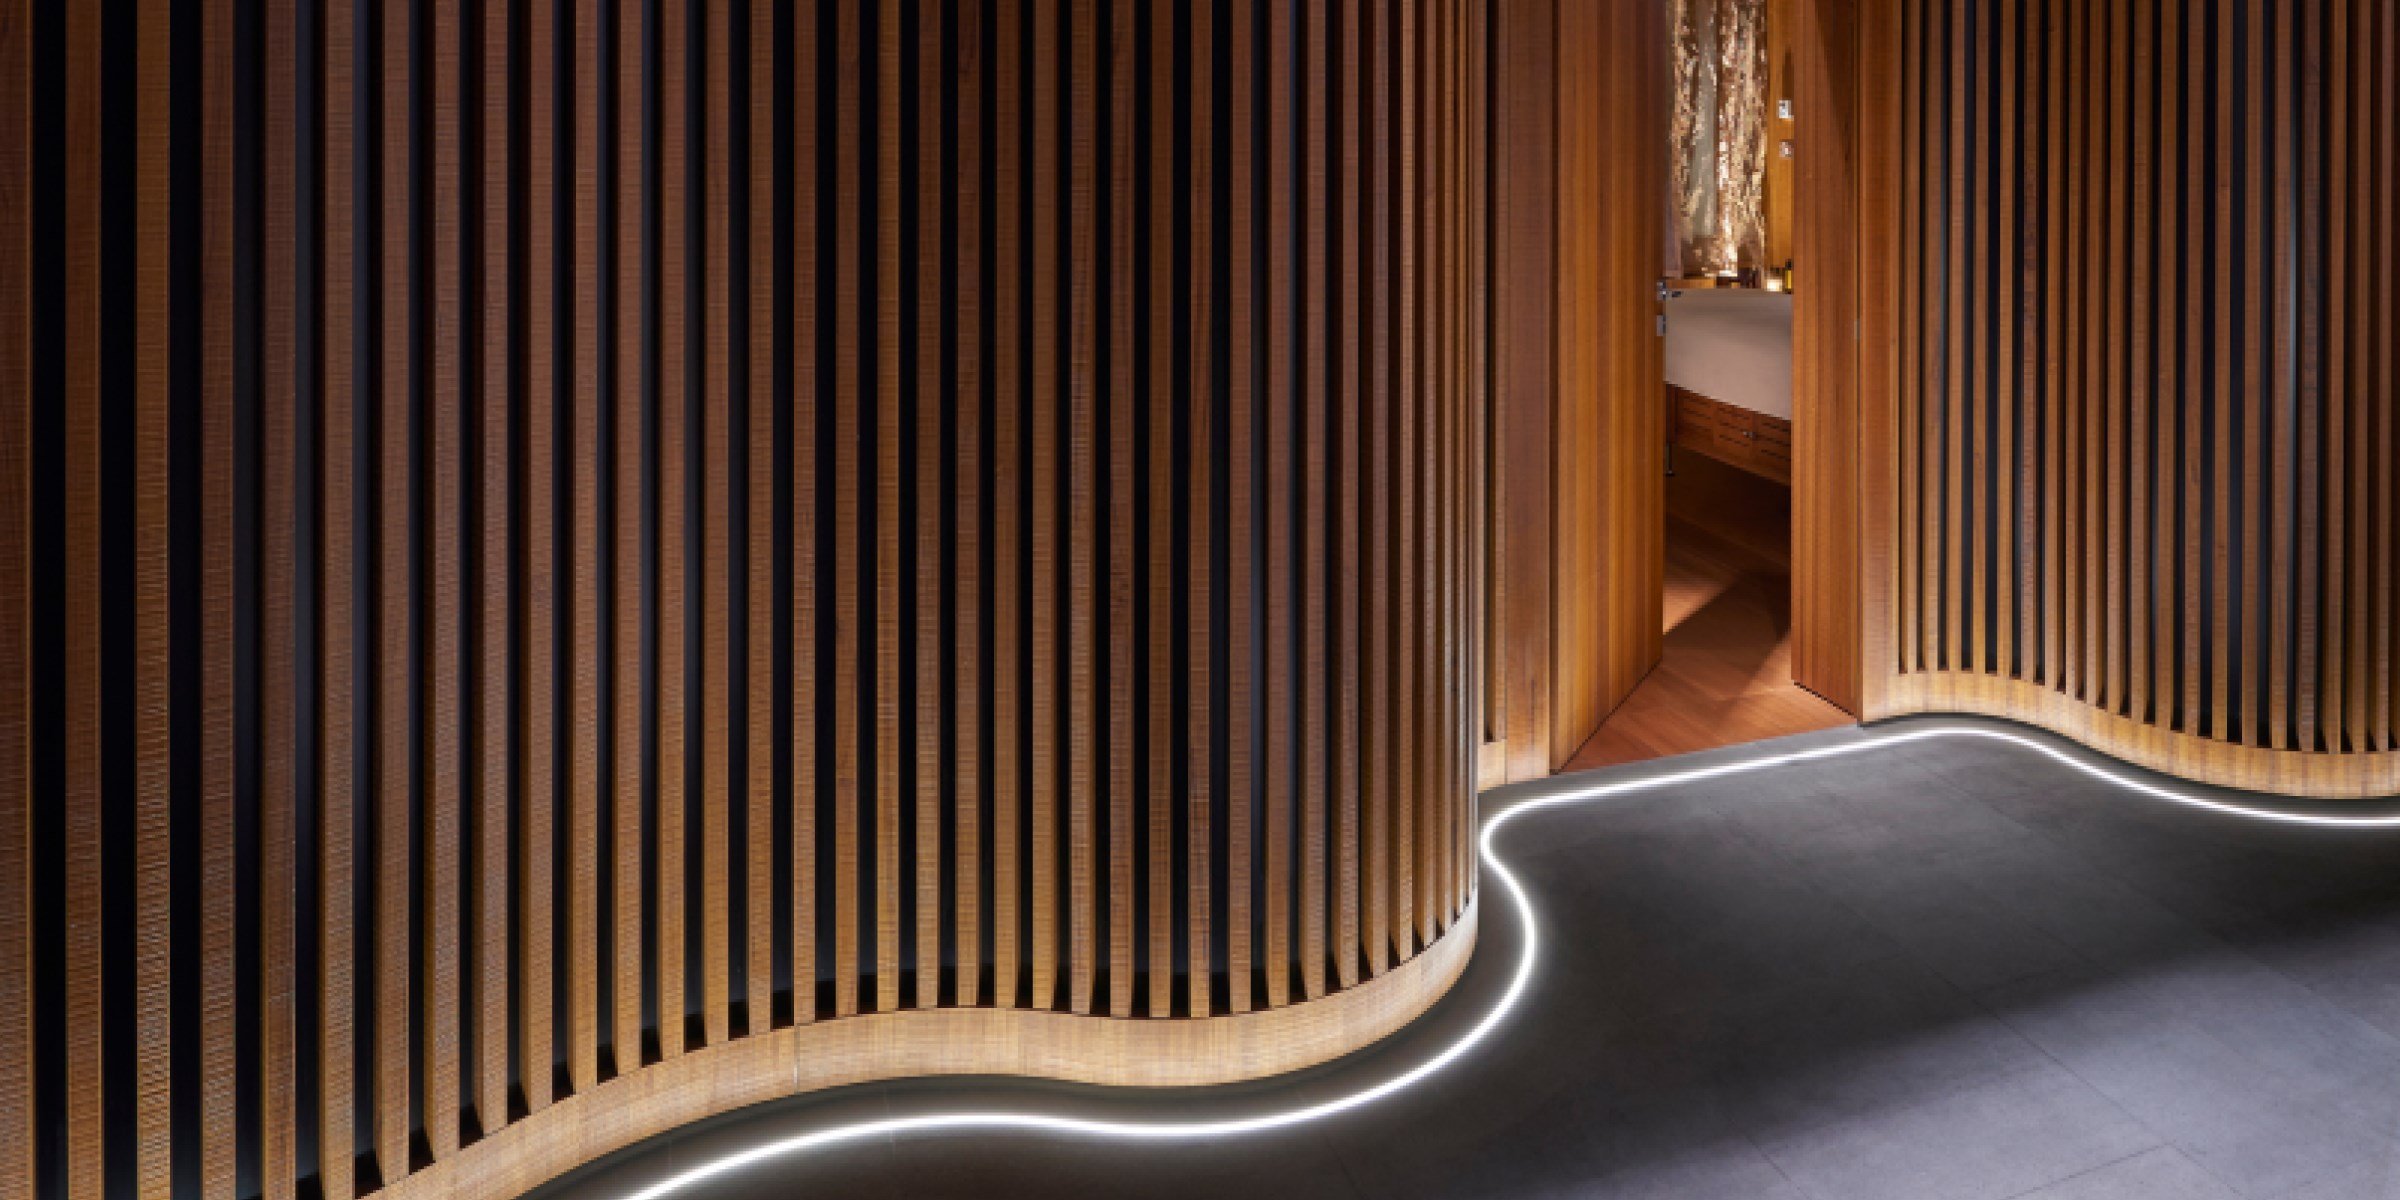 Modern interior with curved wooden slat walls and illuminated floor outlining an open door.